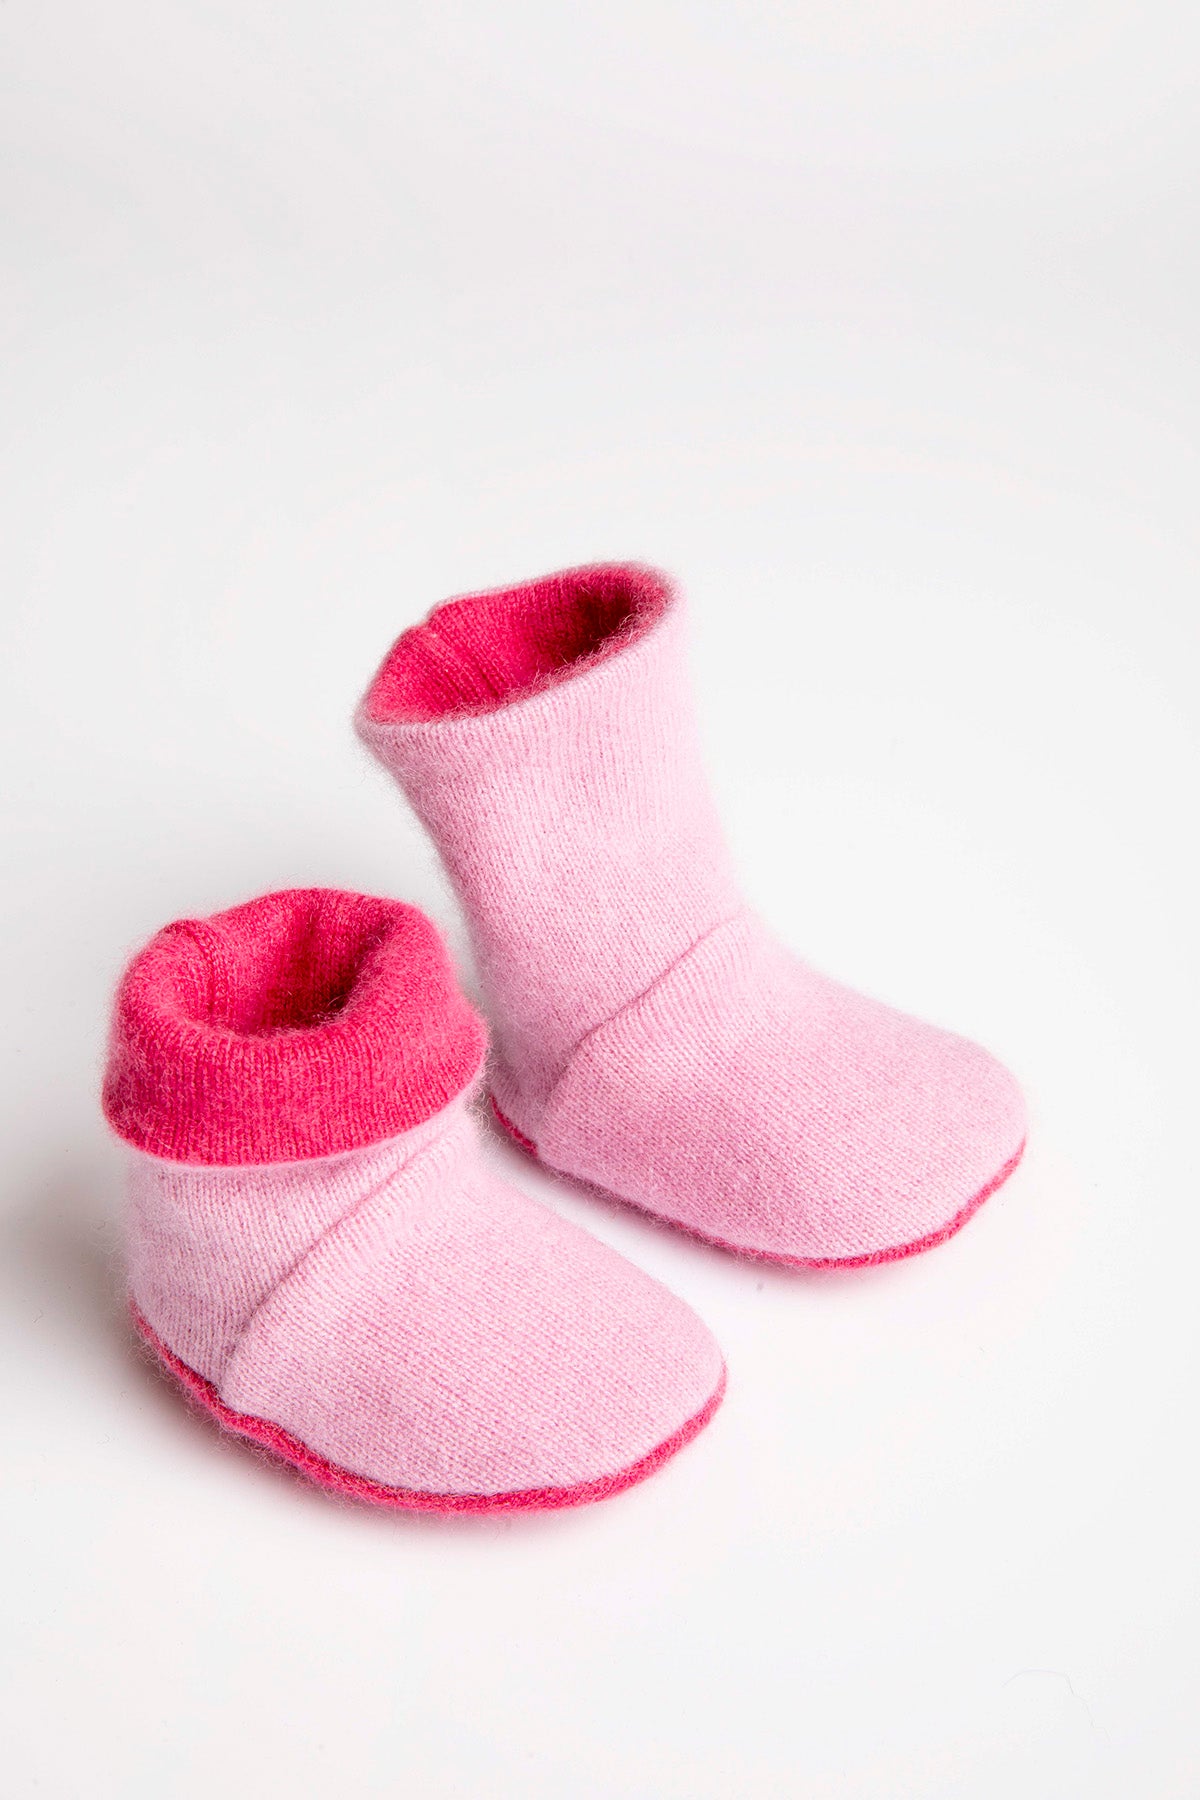 Pink Baby Set - Mittens, Booties and Hat